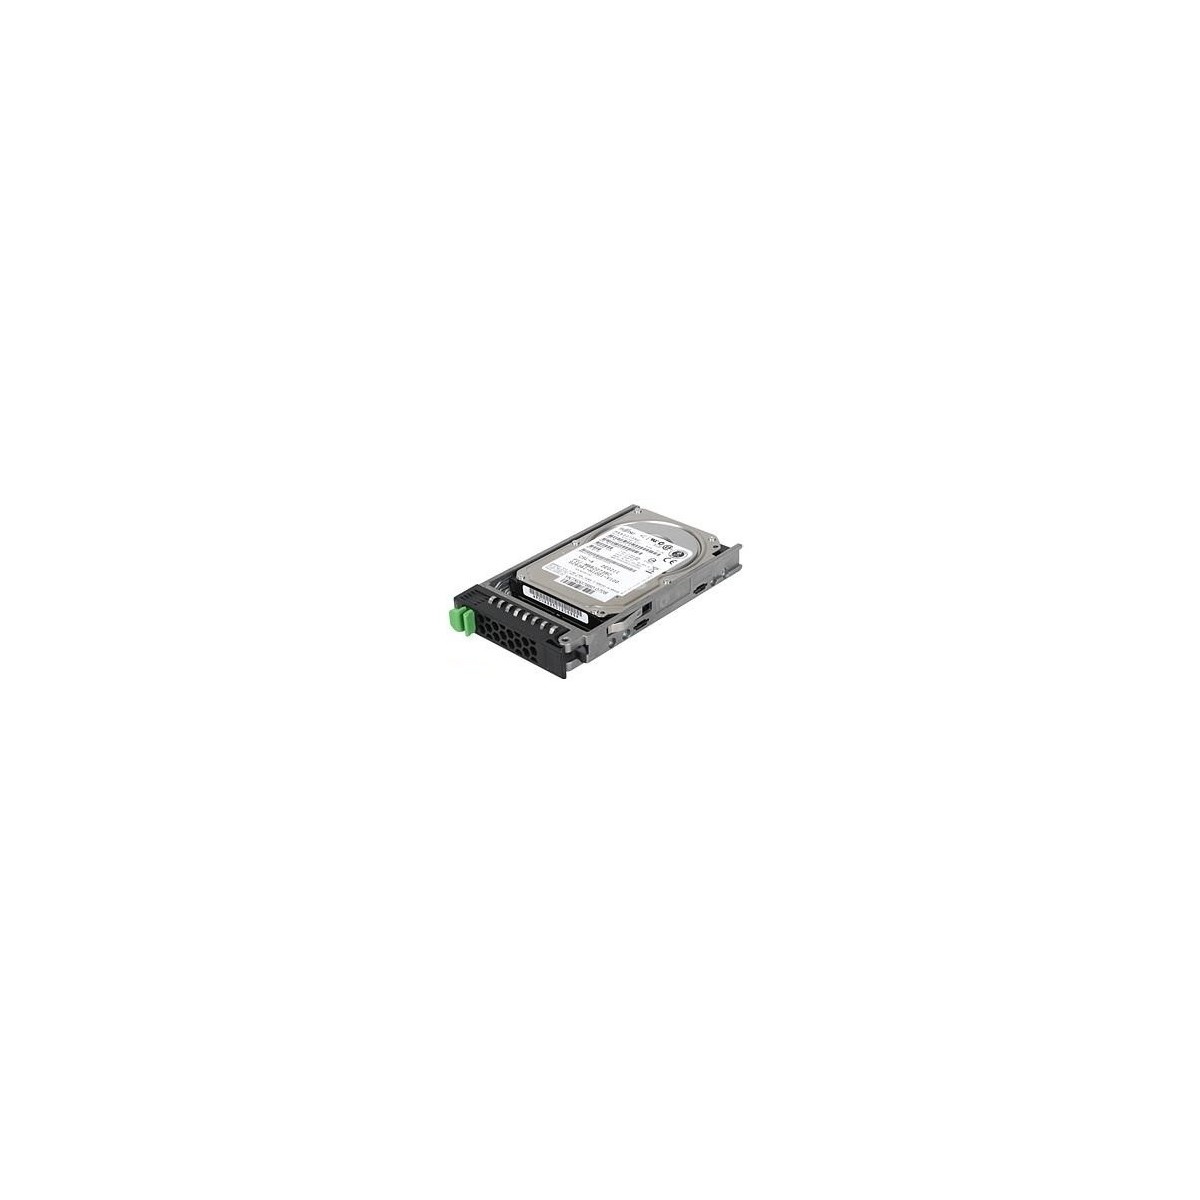 Fujitsu HD SAS 12G 600GB 10K 512N HOT PL 2.5 EP (S26461-F5550-L160) - Solid State Disk - Serial Attached SCSI (SAS)